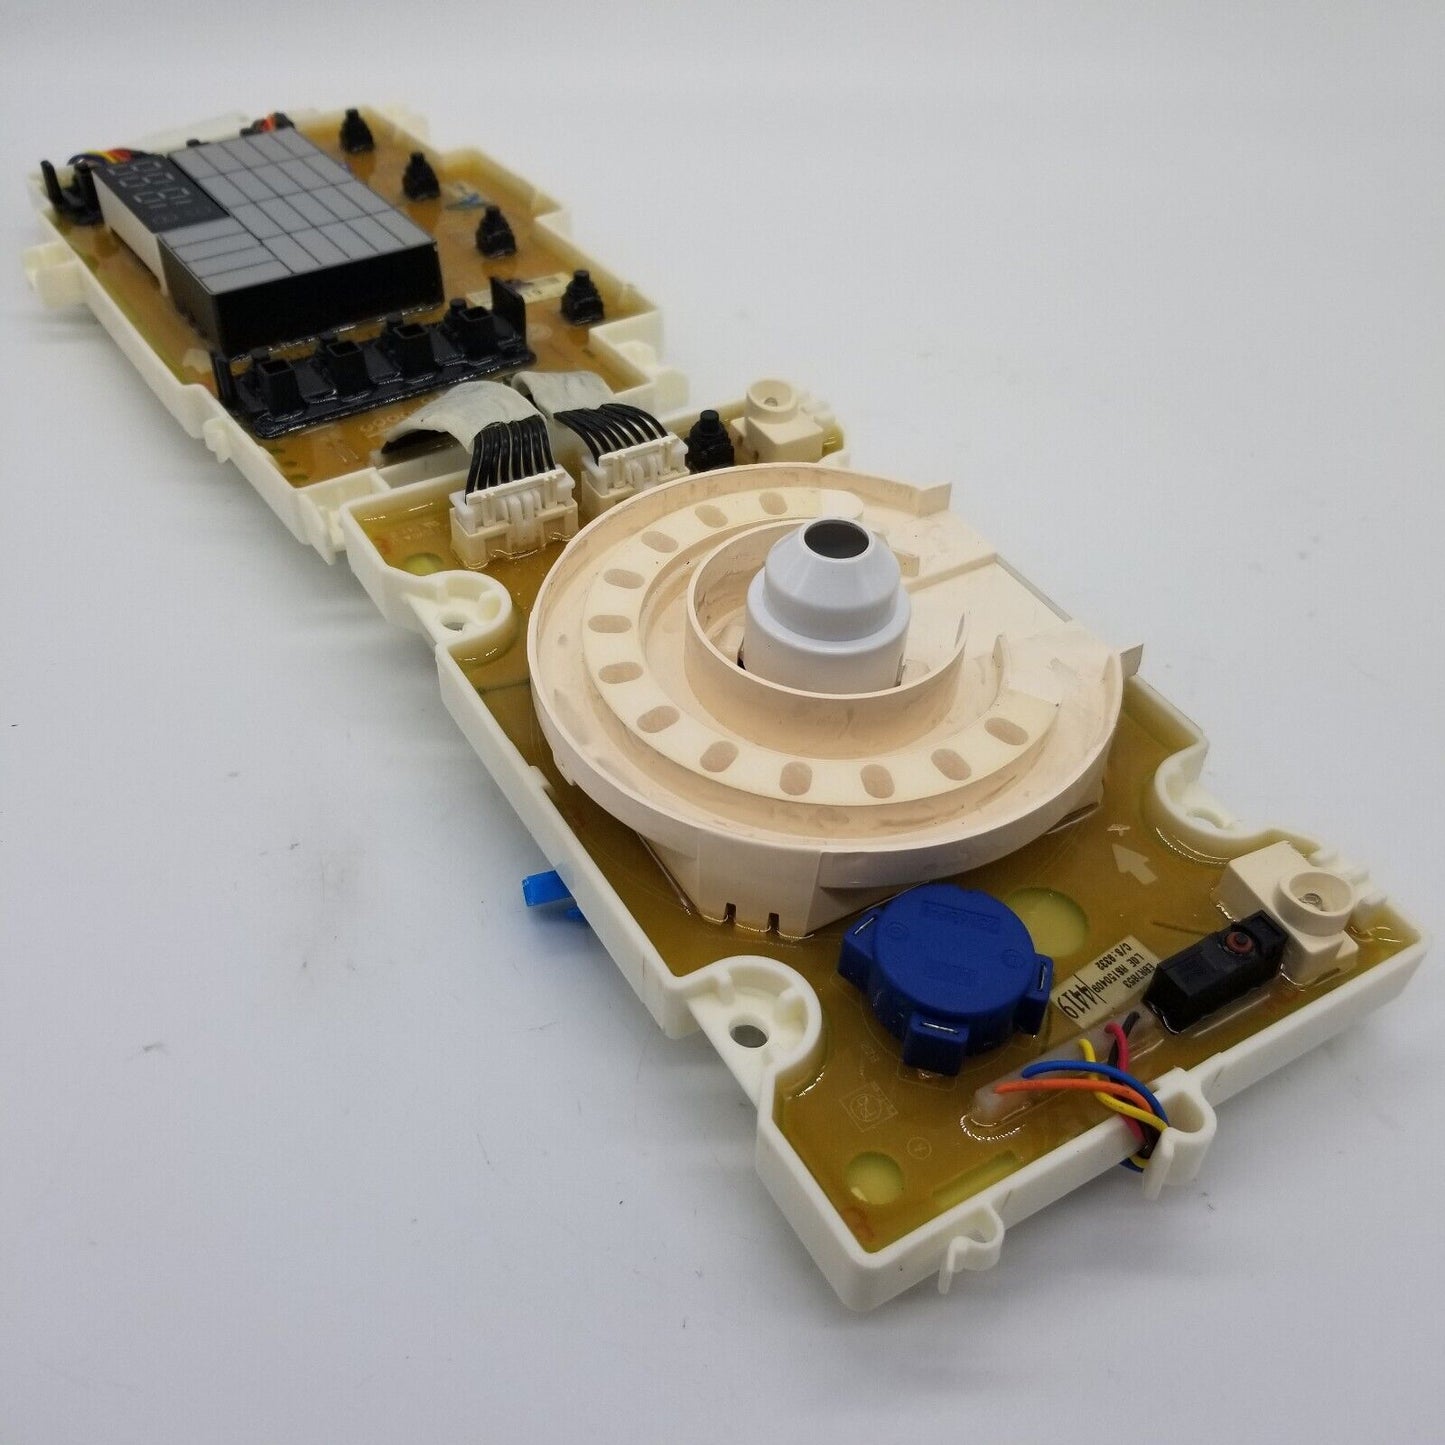 Genuine OEM Replacement for LG Washer Control Board EBR78534419